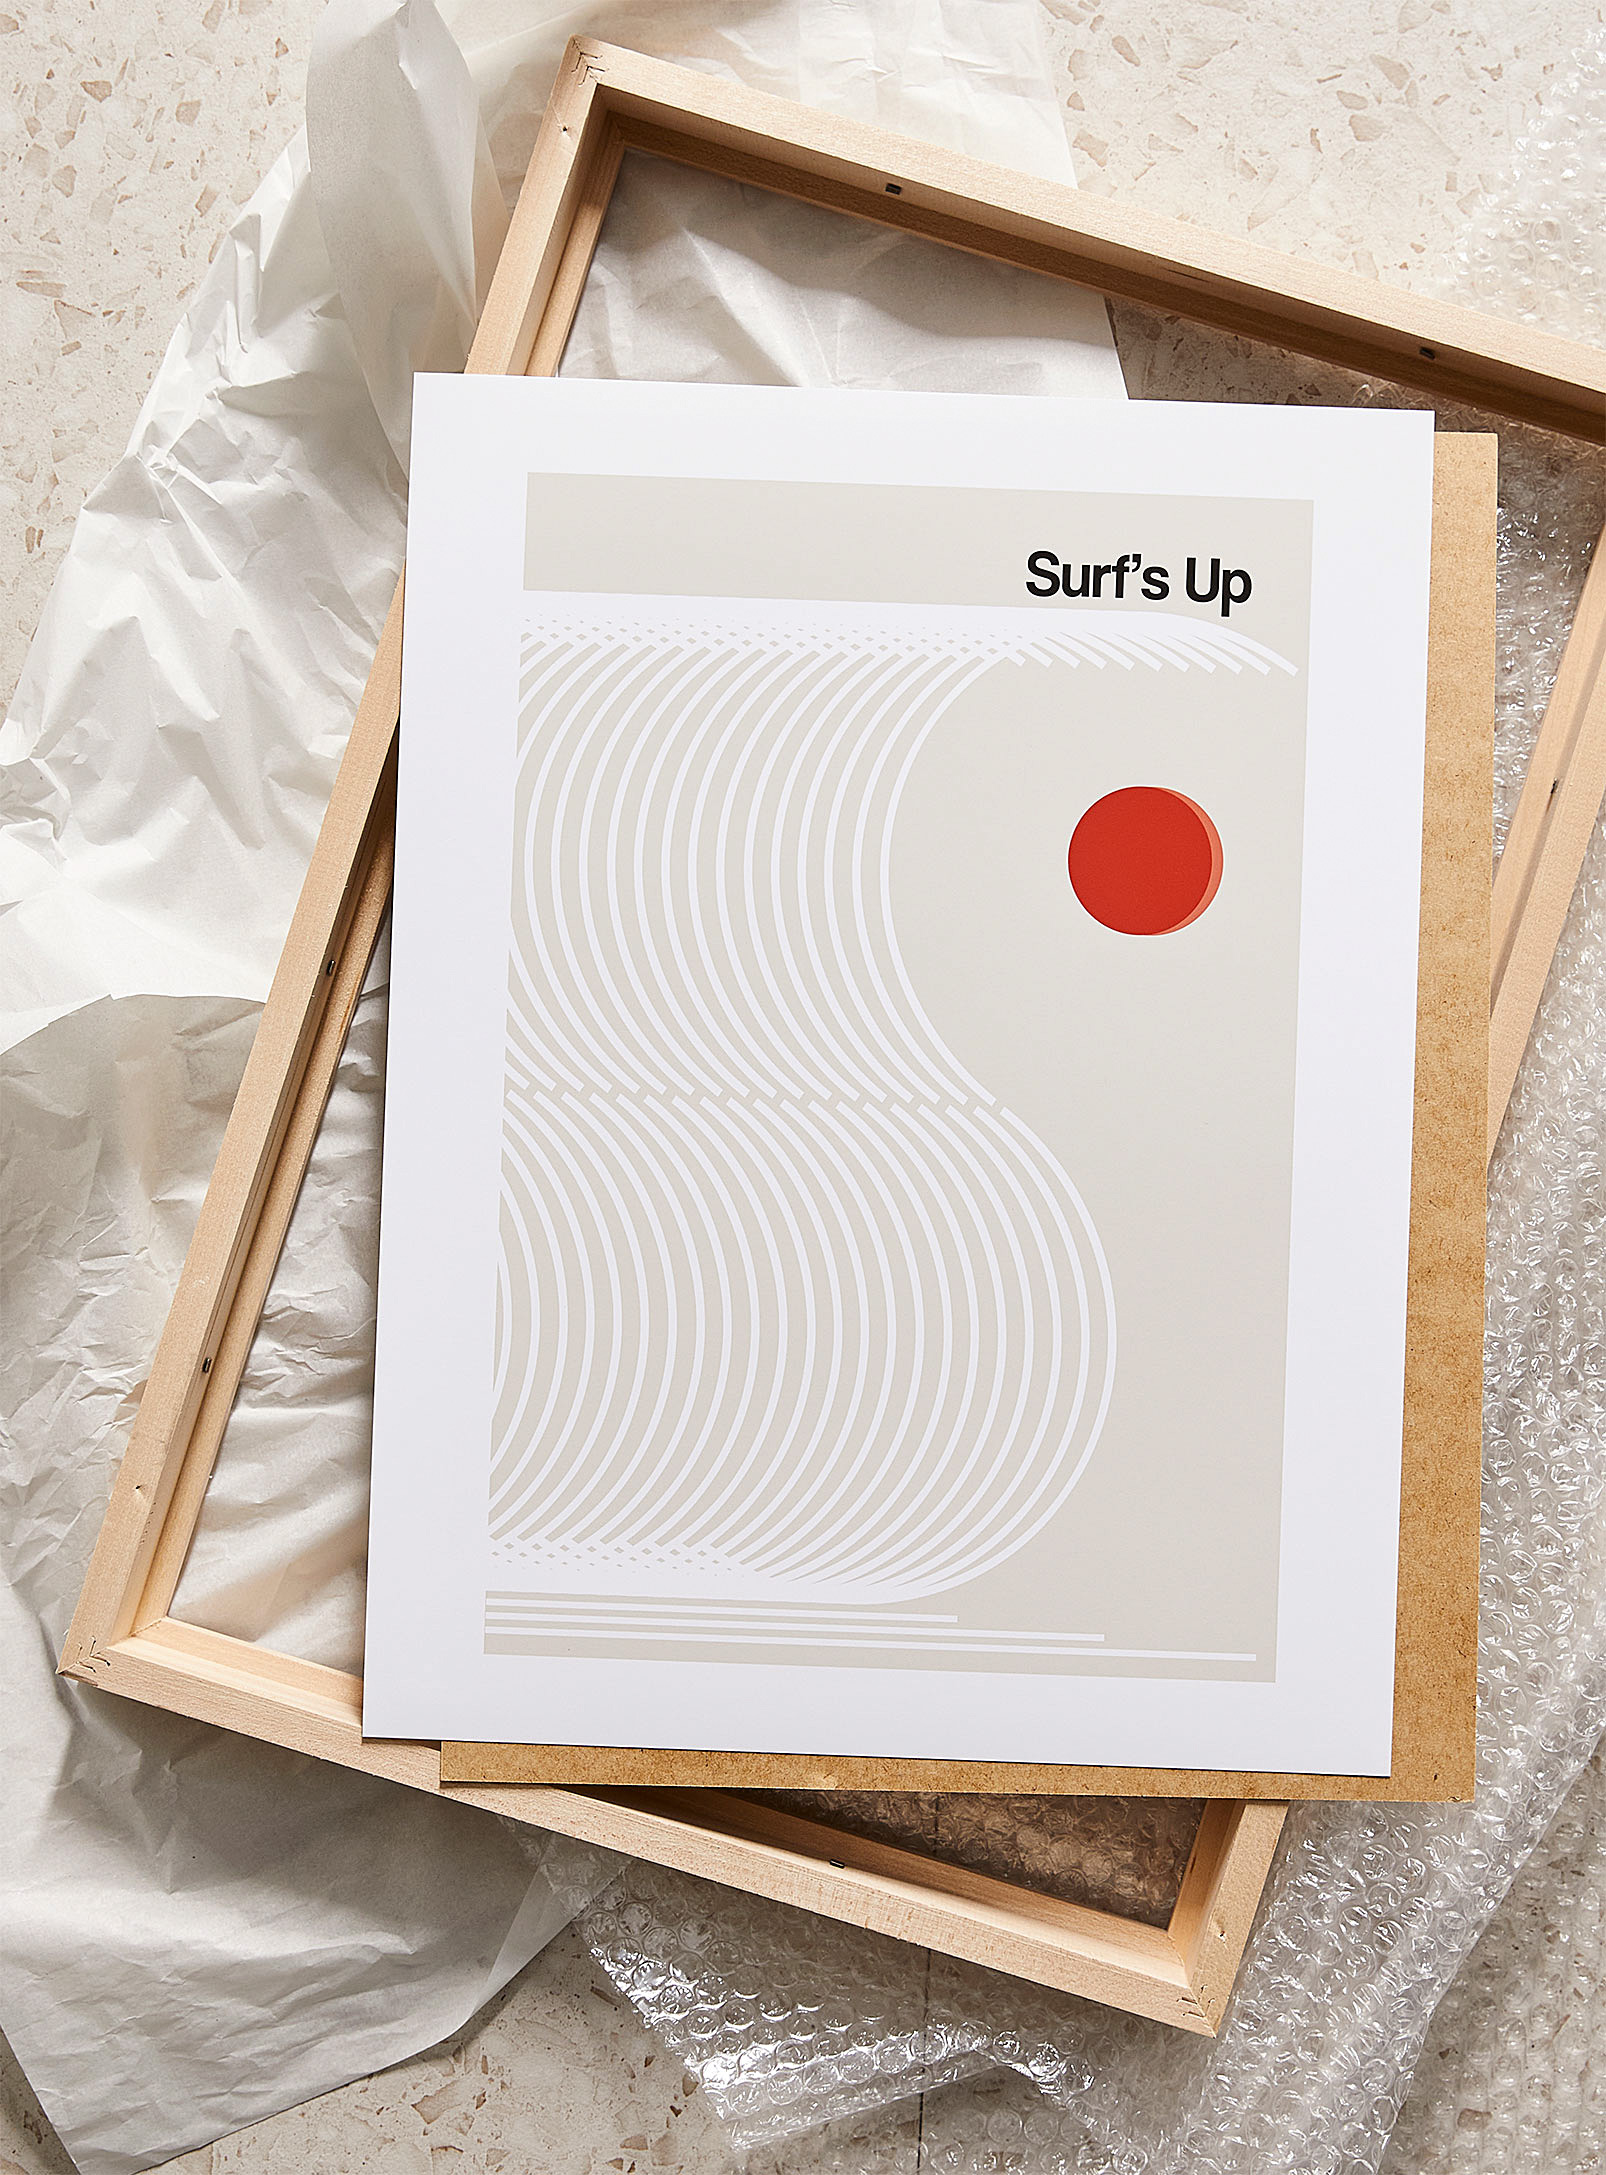 Simons Maison Surfs Up Art Print See Available Sizes In Ivory/cream Beige